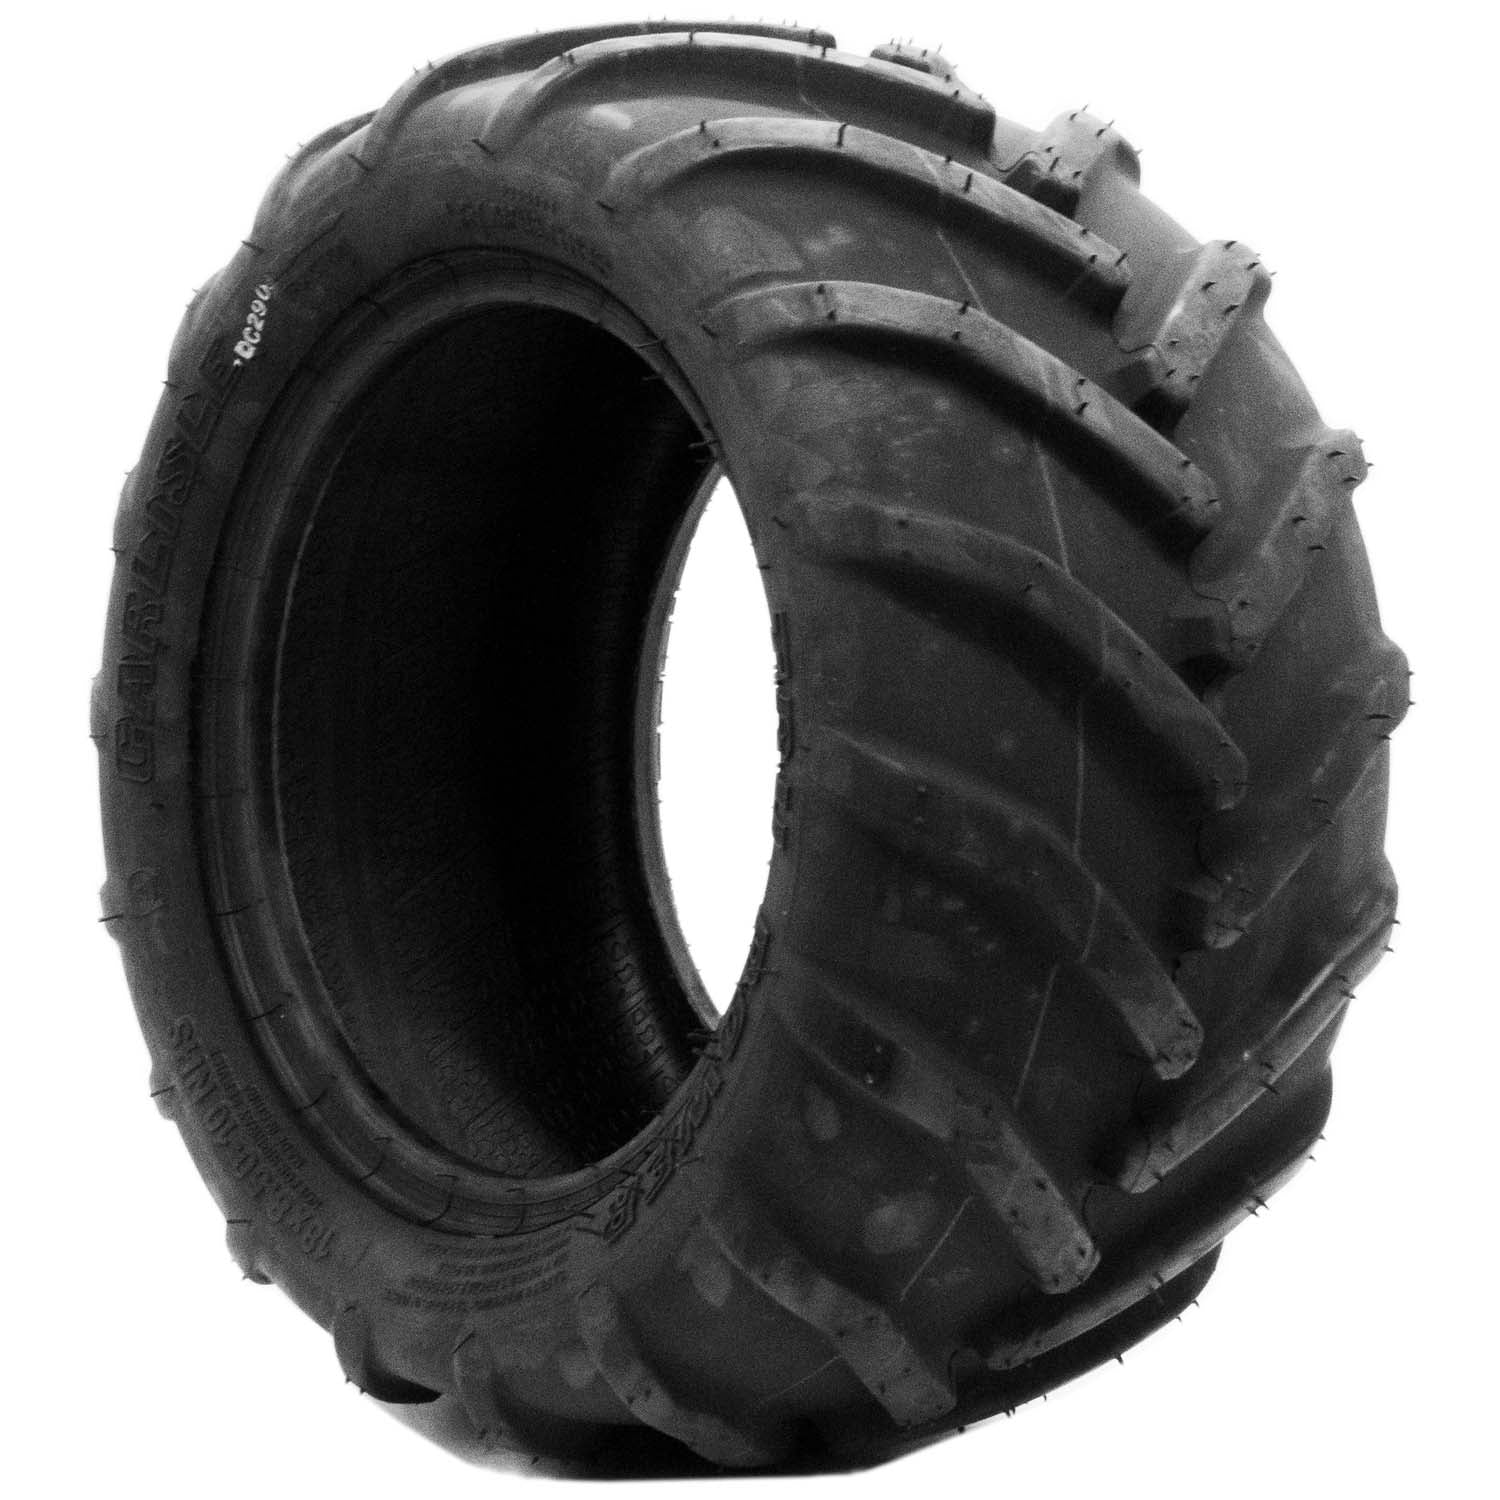 Carlisle Tru Power Lawn and Garden Traction Tire 4ply 6-12